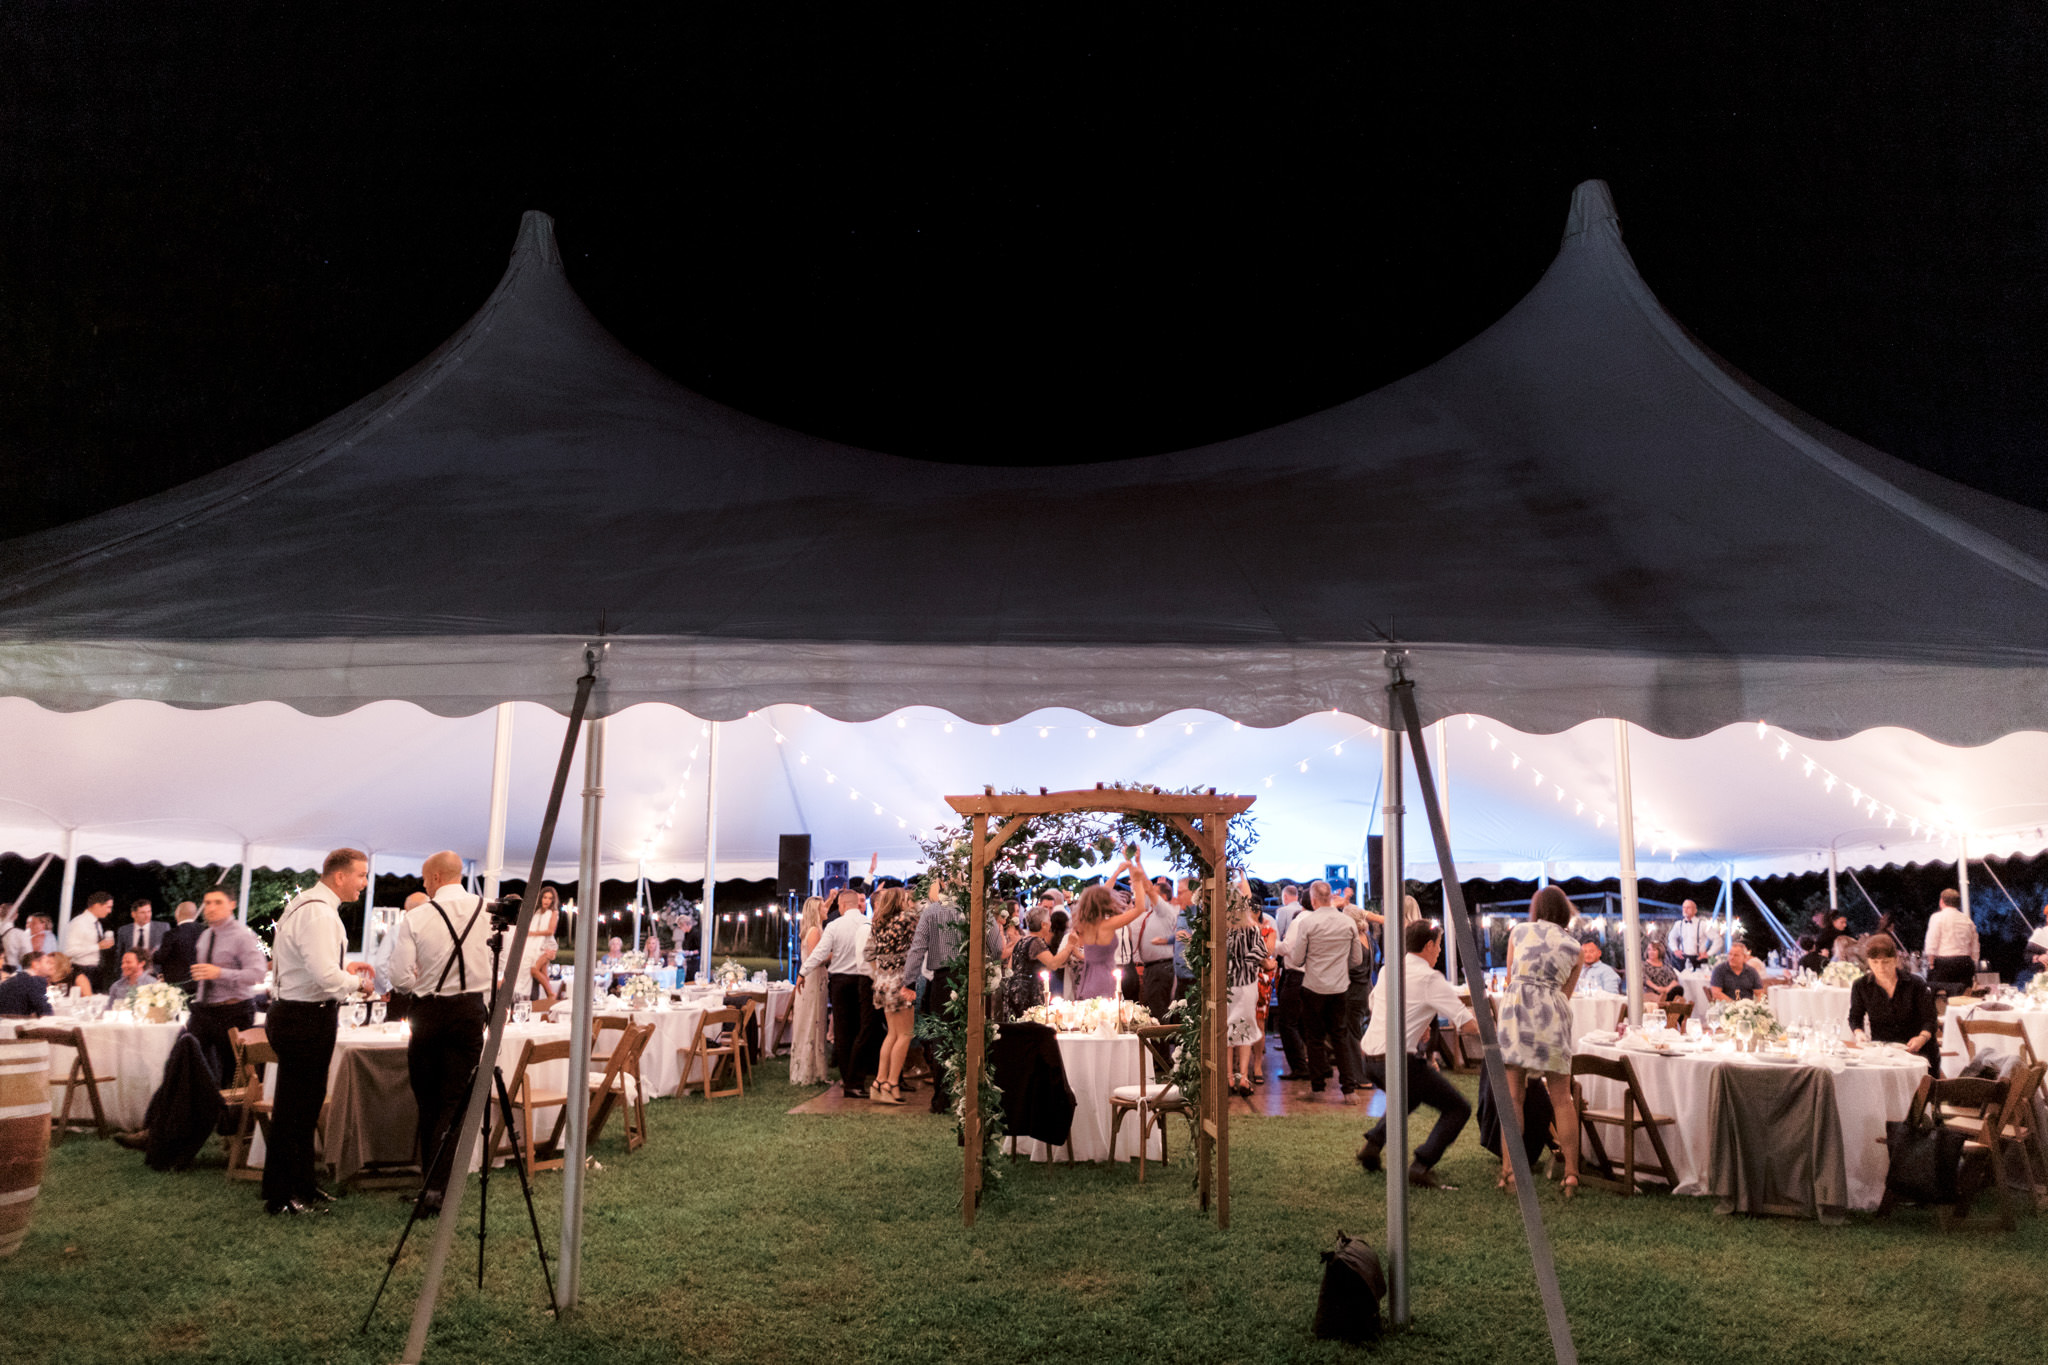 Guests are having fun inside a wedding tent in New York City.